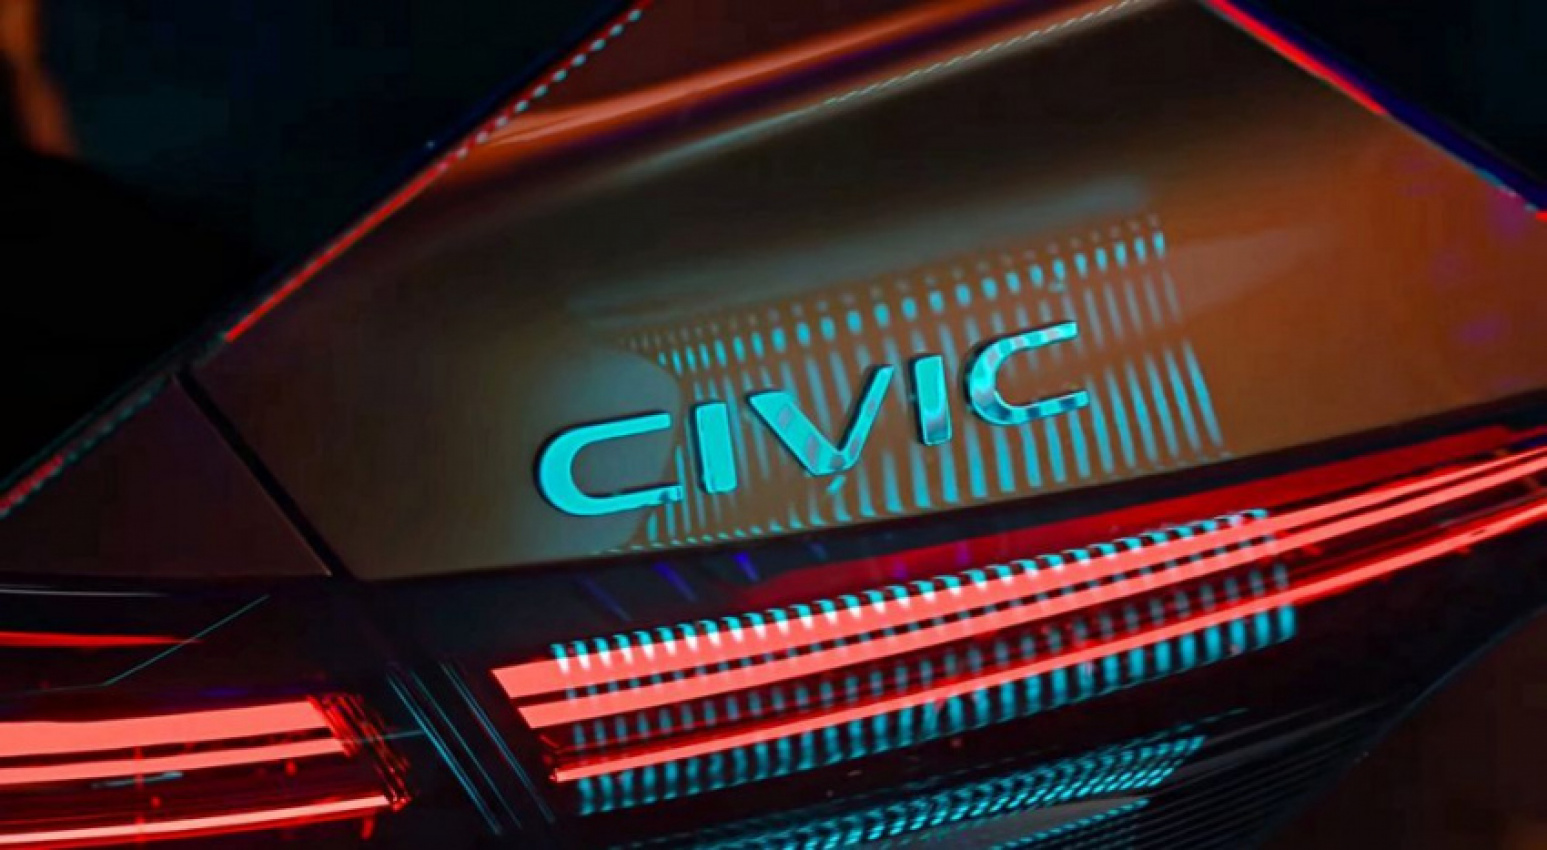 autos, cars, honda, 11th-gen, auto news, civic, preview, prototype, teaser, vtec turbo, honda teases all-new civic, 17th november reveal confirmed